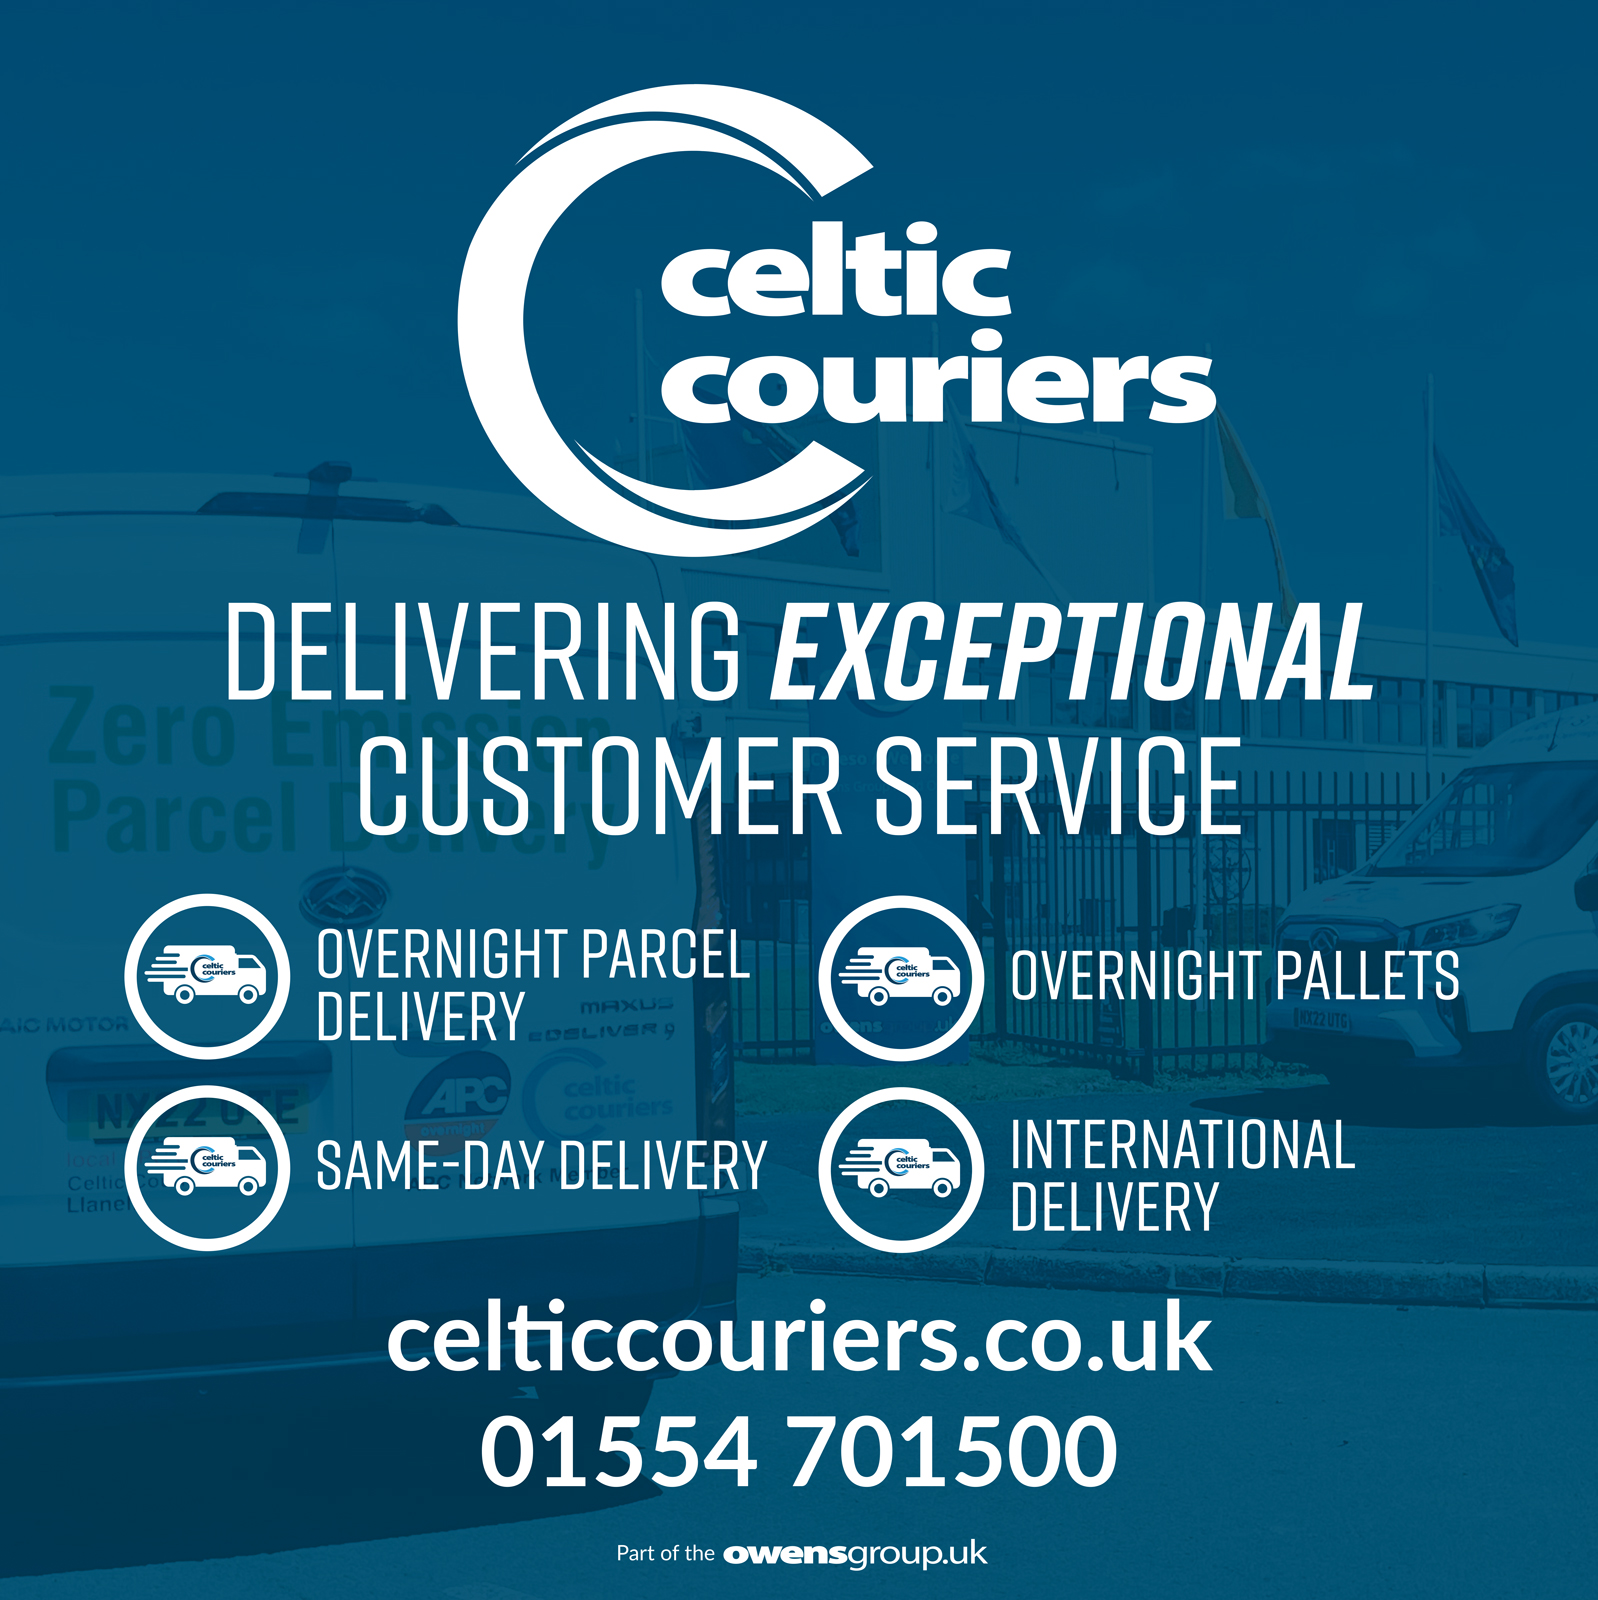 Celtic-Couriers-Ad